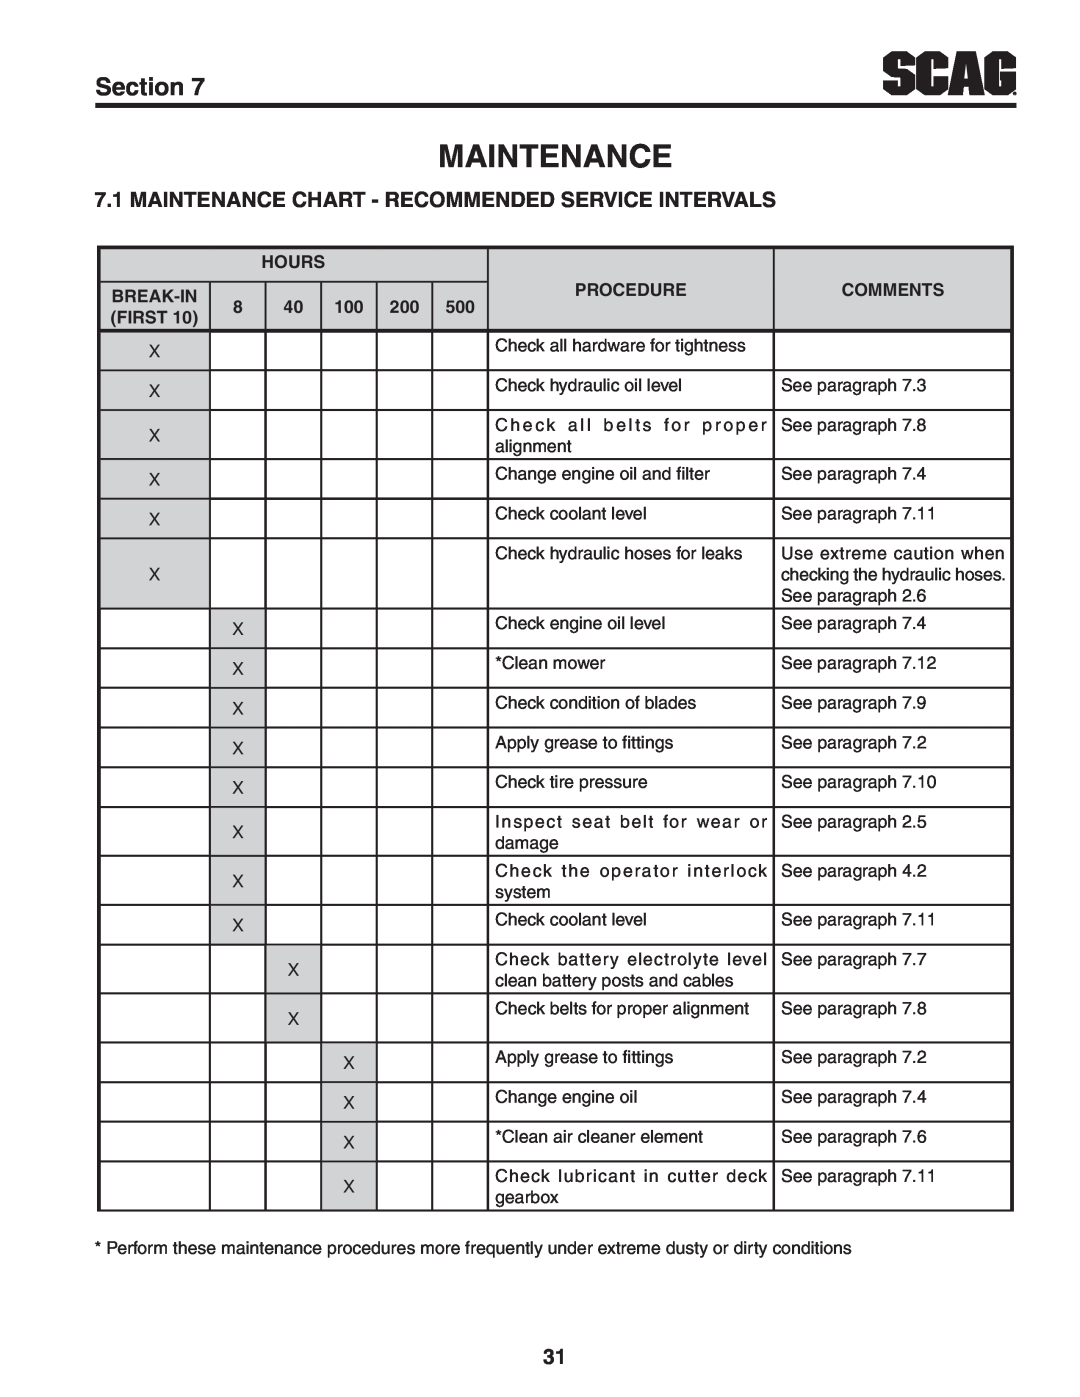 Scag Power Equipment STT-31EFI-SS operating instructions Maintenance Chart - Recommended Service Intervals, Section 